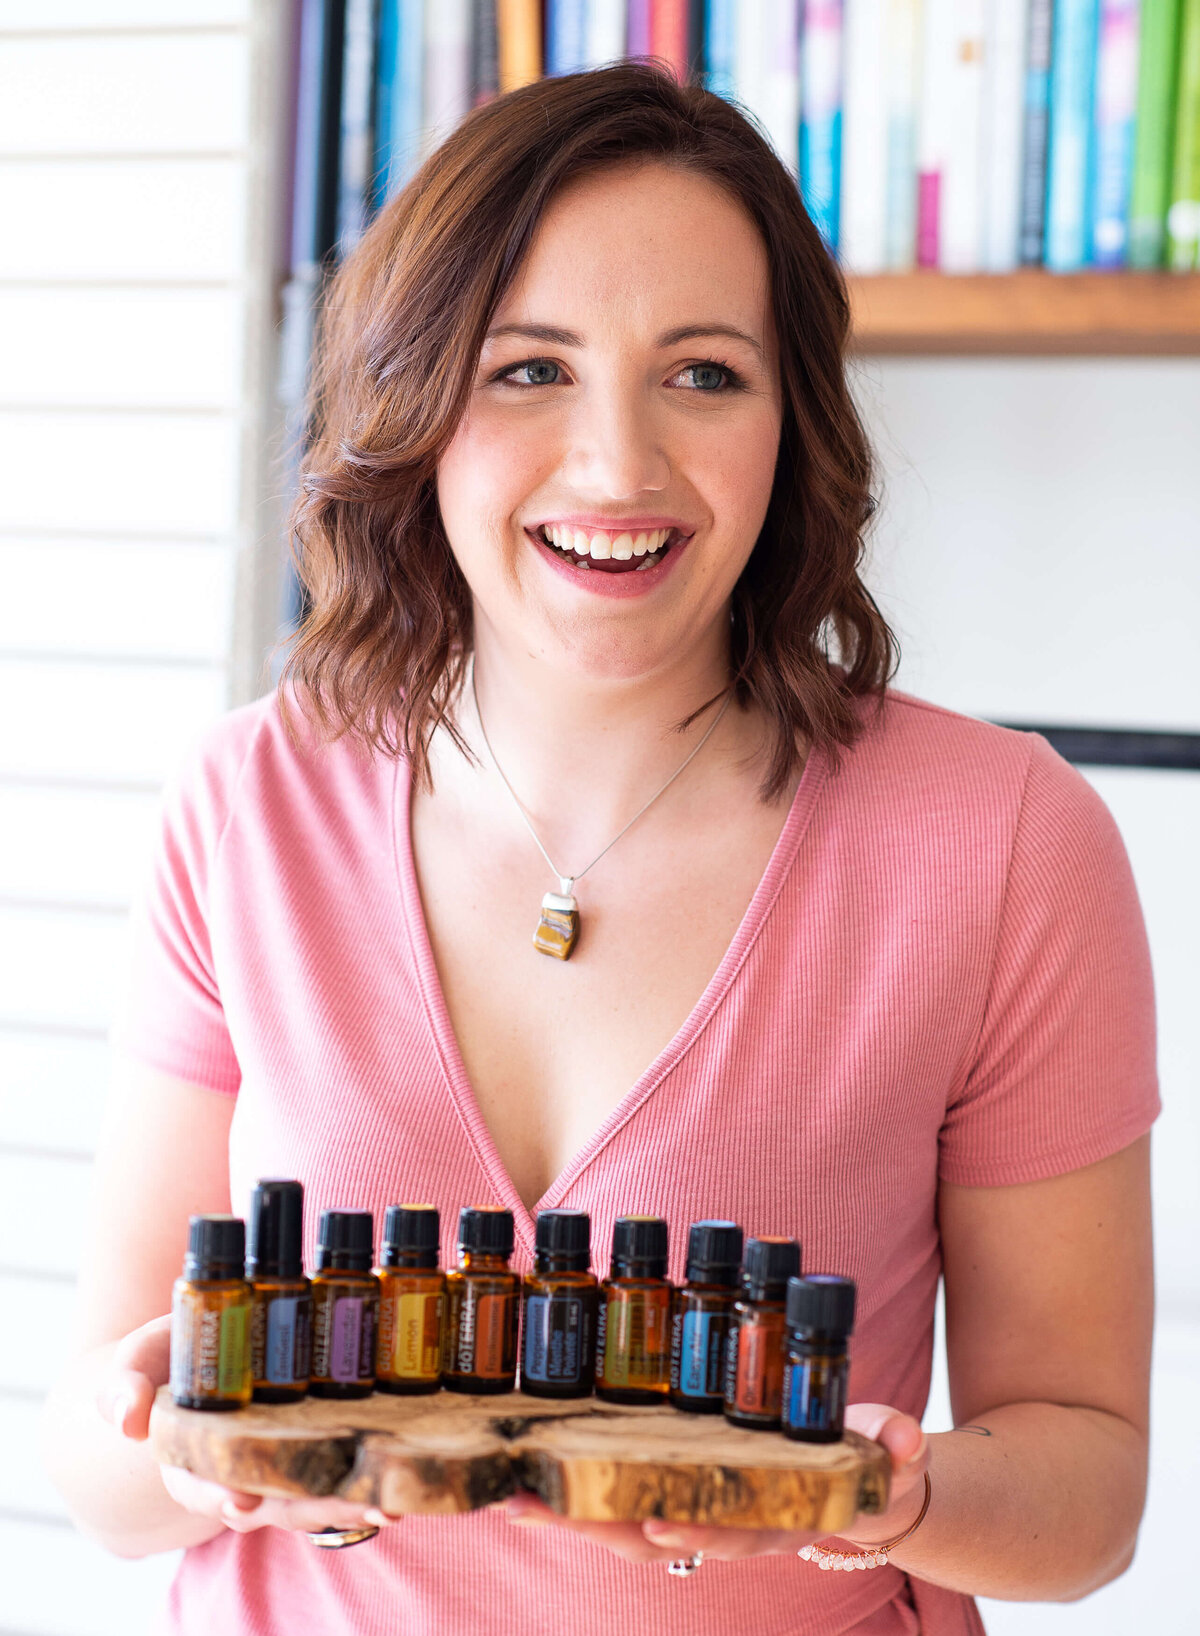 Ottawa branding photography showing a DoTerra wellness advocate holding a tray of assorted popular essential oils.  Captured in the yoga studio by JEMMAN Photography COMMERCIAL